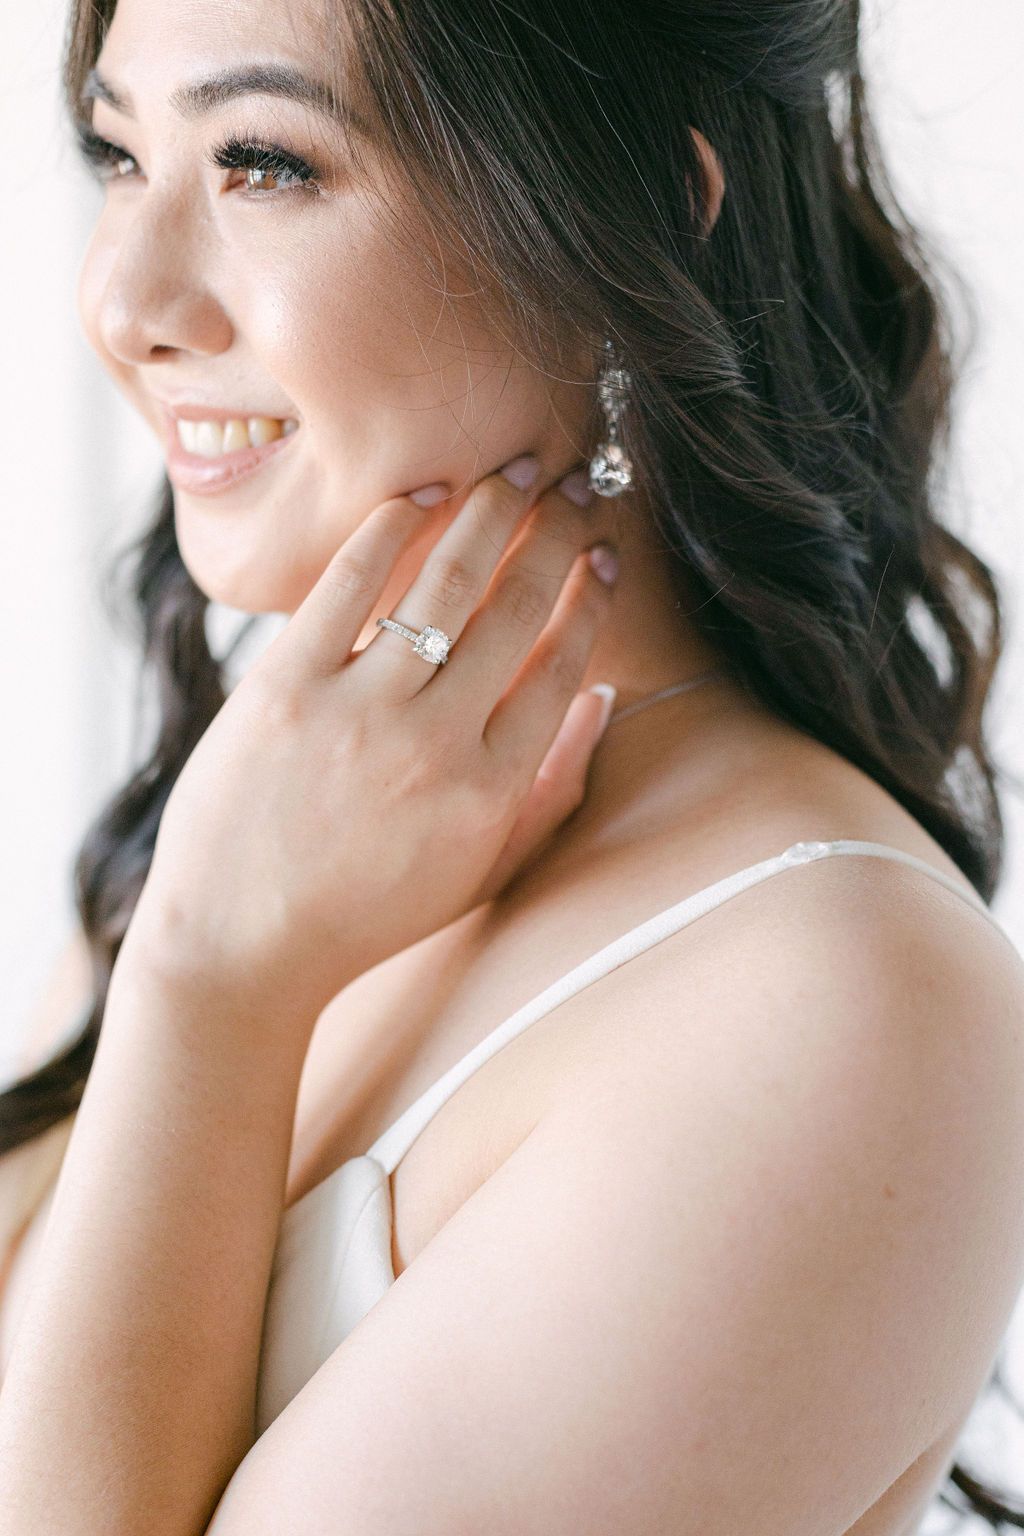 Modern Asian Wedding in Vancouver BC, Bridal Hair & Makeup: hairstyle inspiration for the bride, half up half down with hairpiece